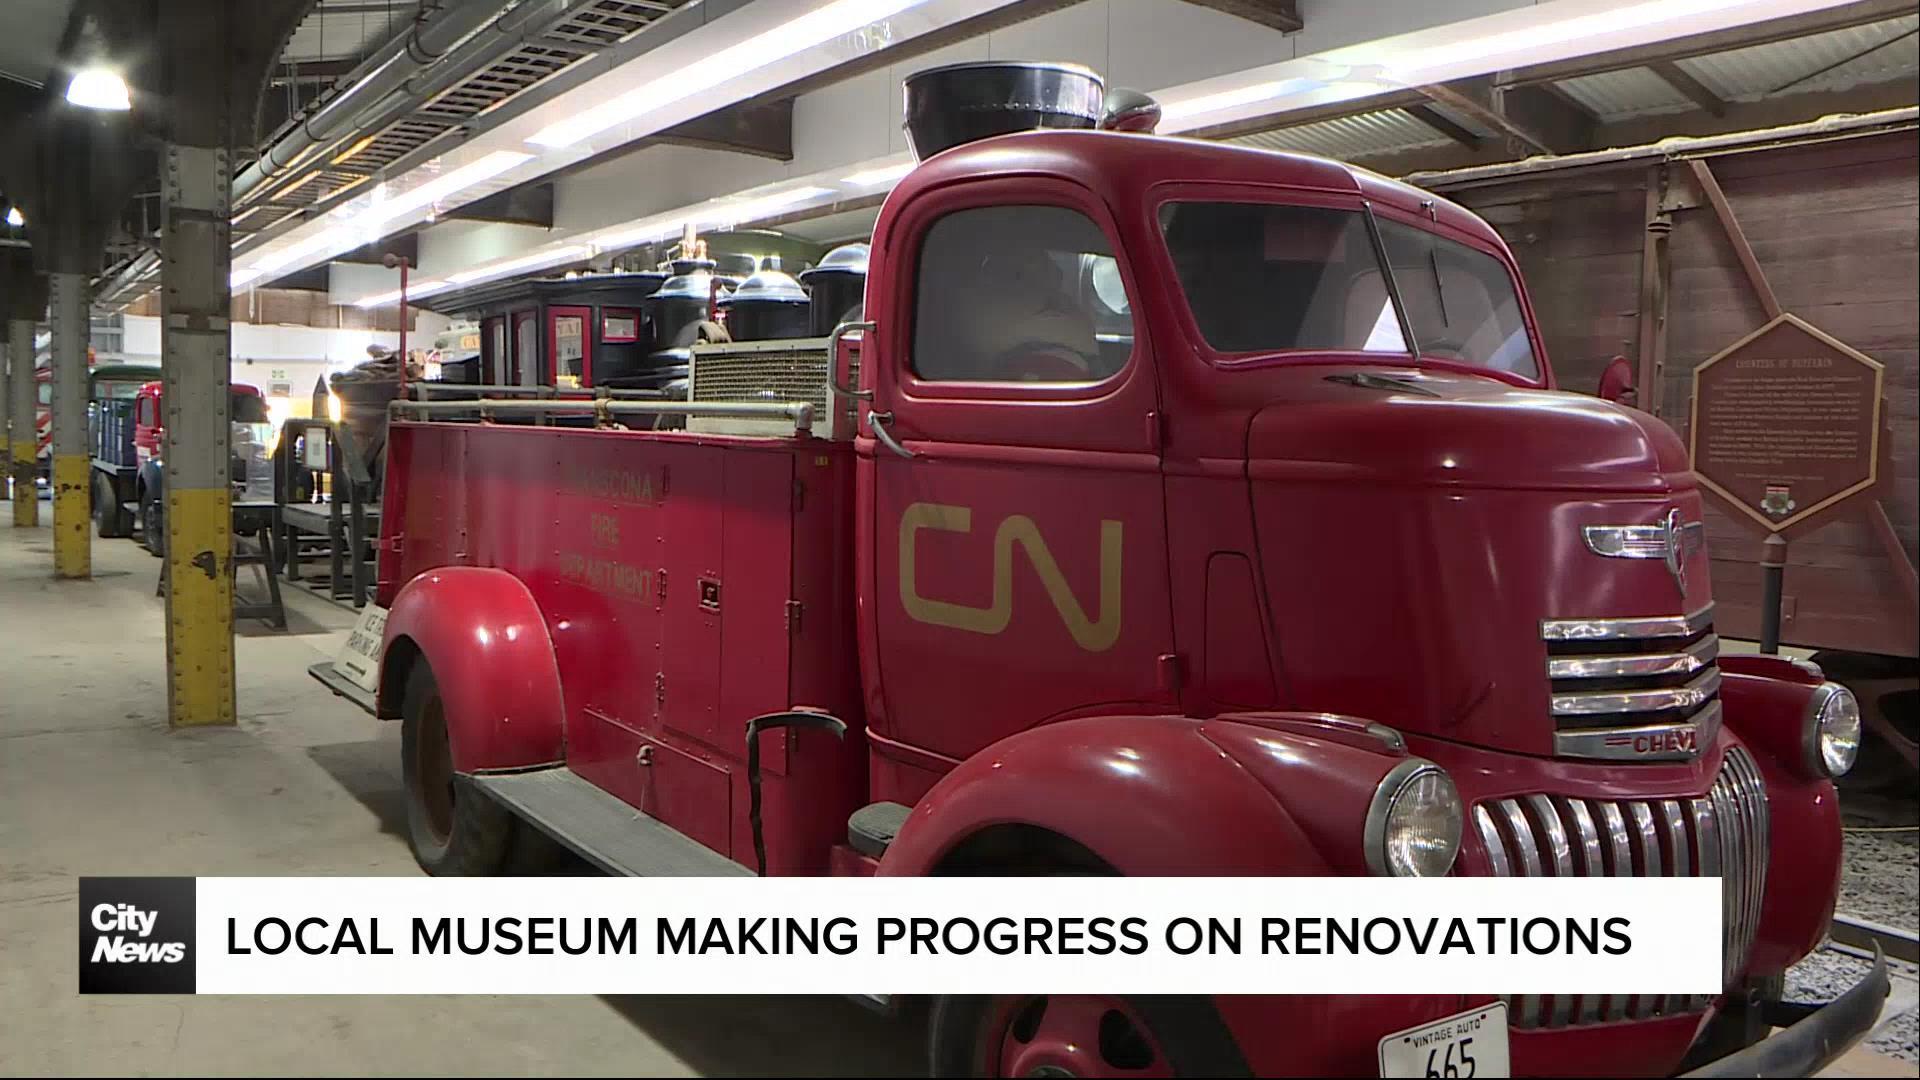 Railway museum finishes first phase of renovations